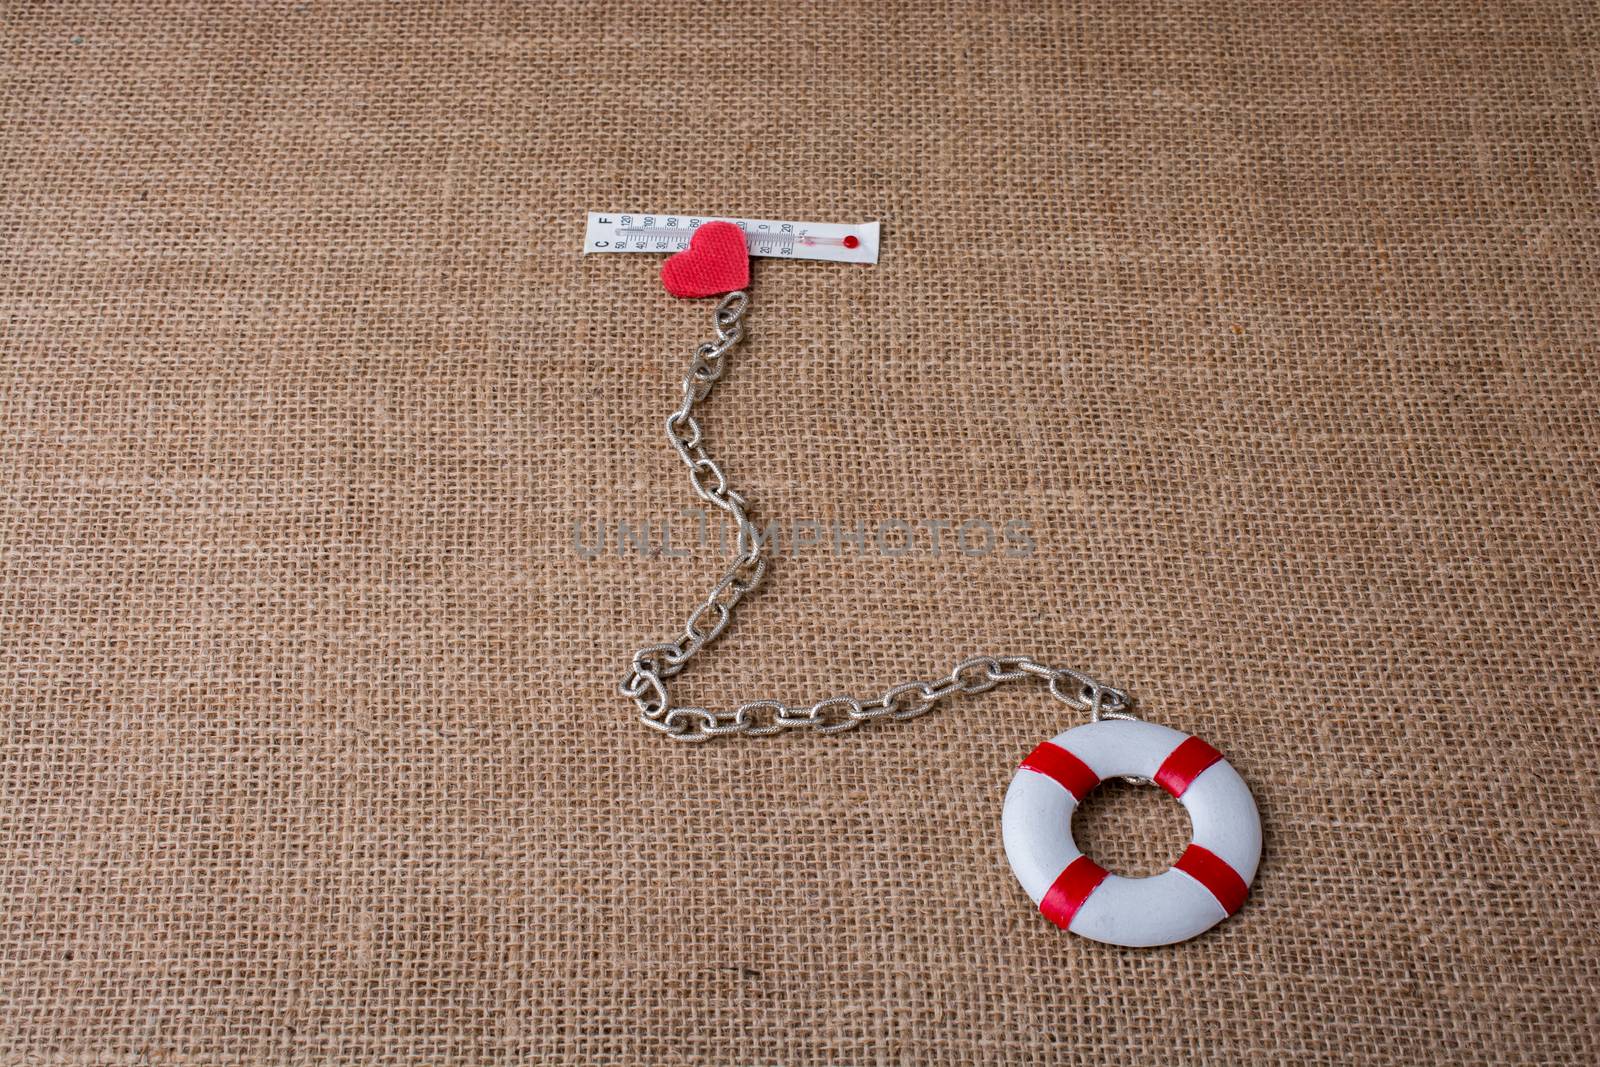 Heart attached to a life preserver and athermometer